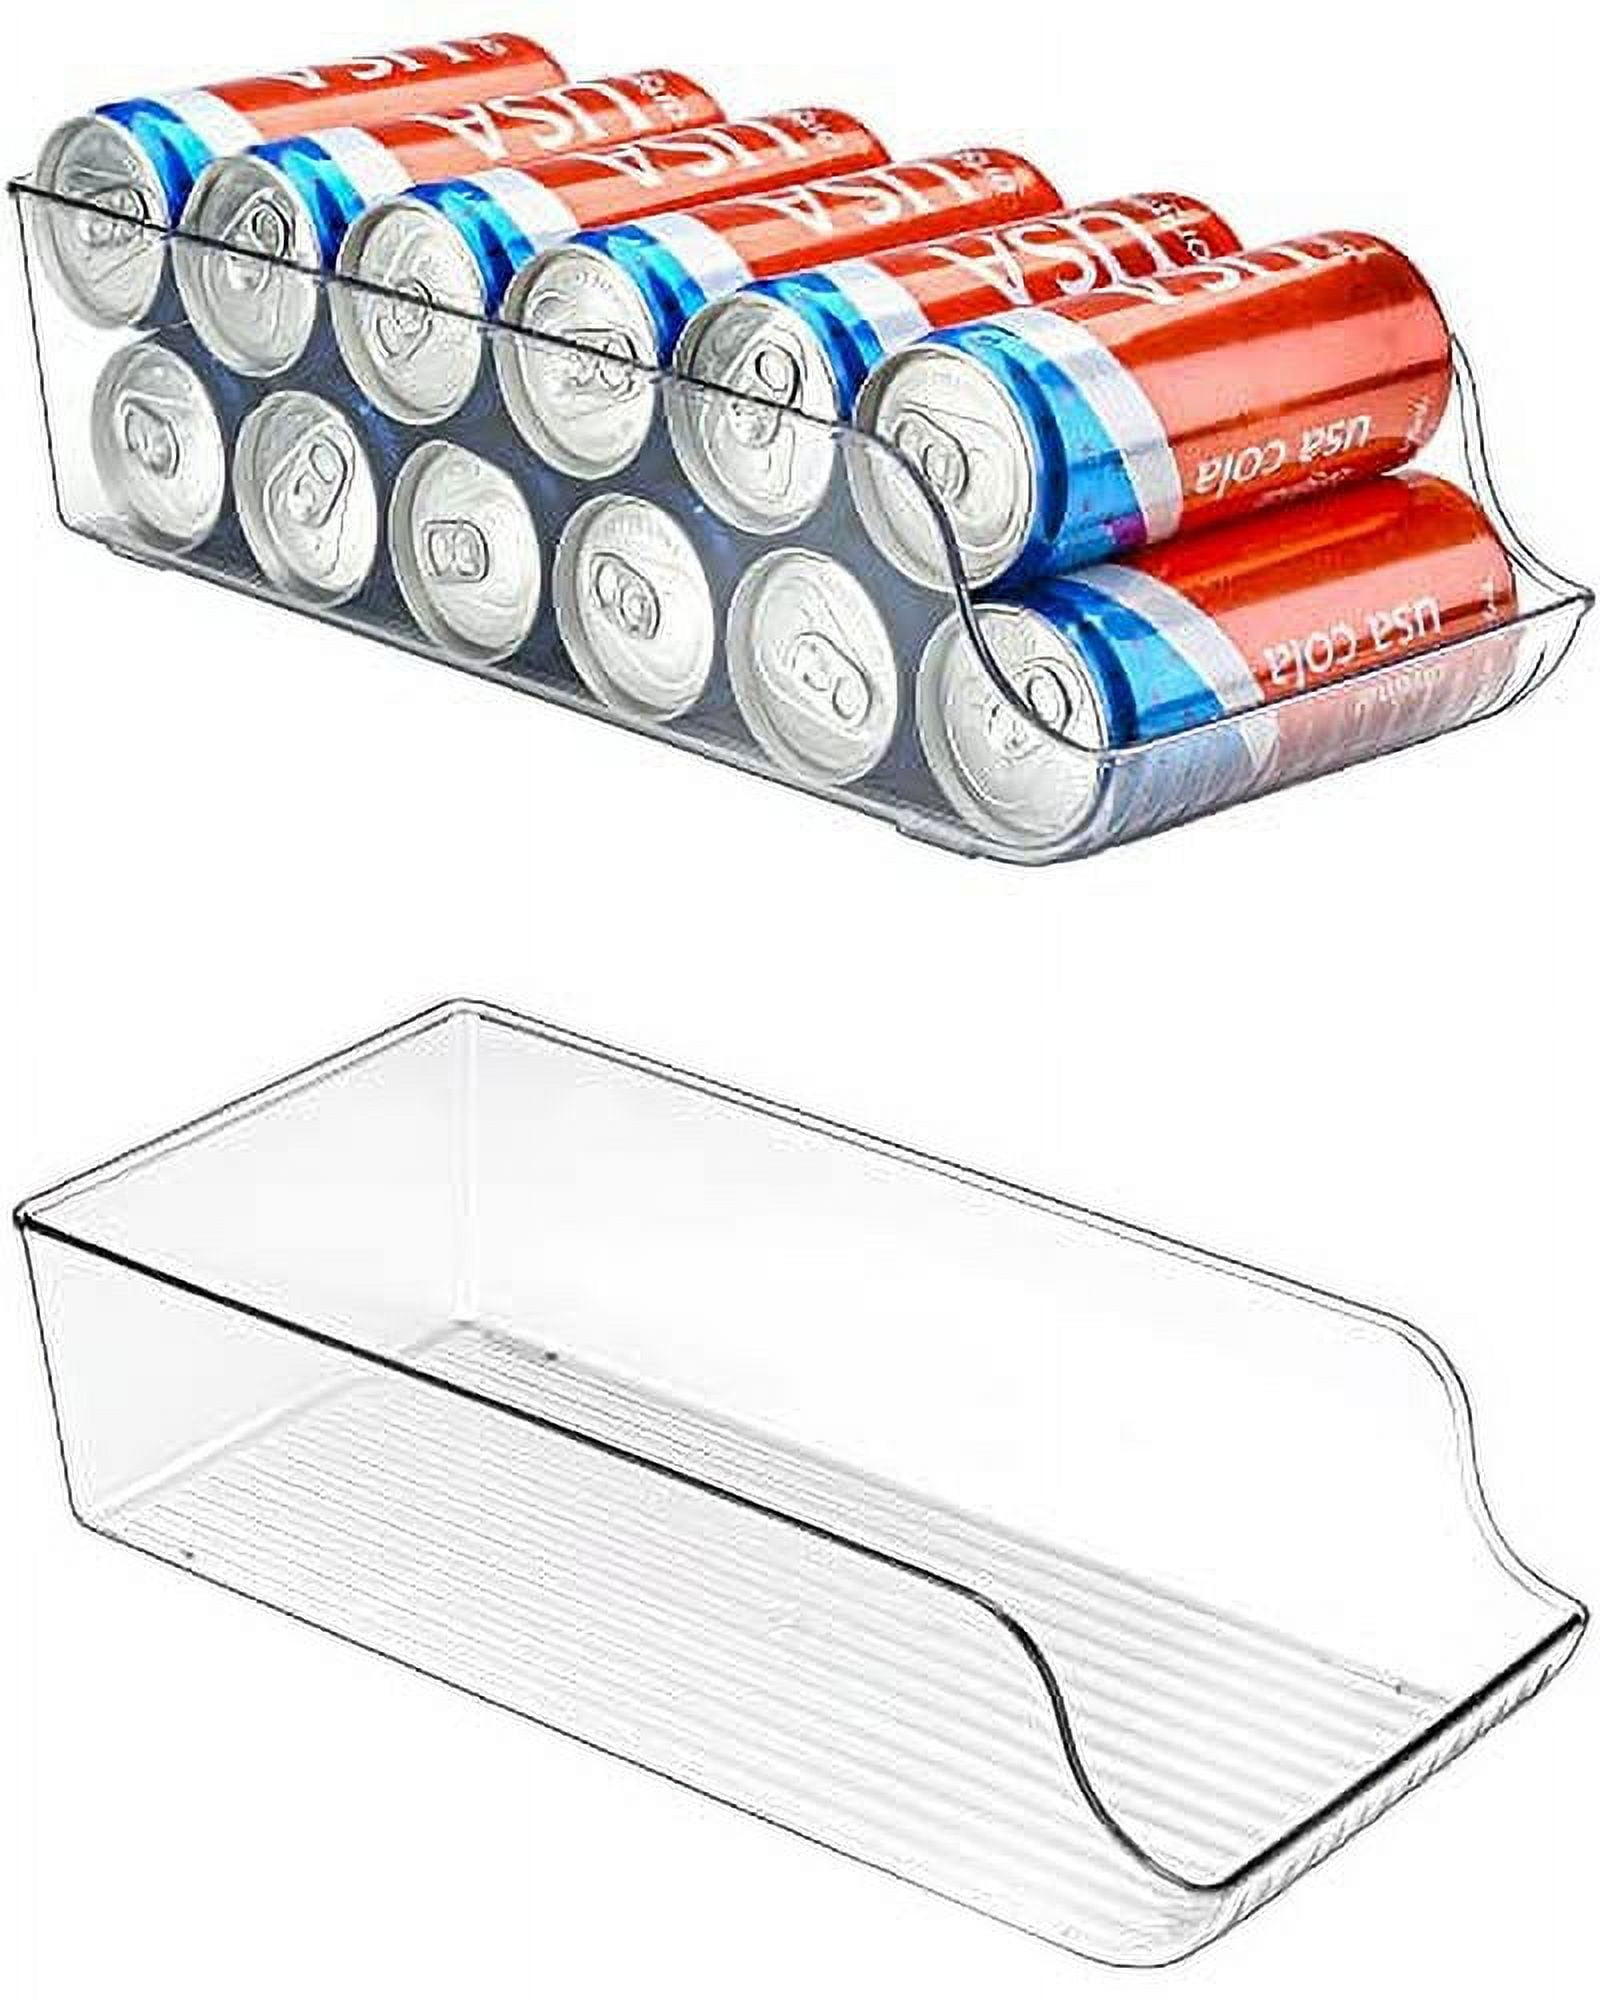 Soda Can Organizer for Refrigerator, Stackable Canned Food Pop Cans Co –